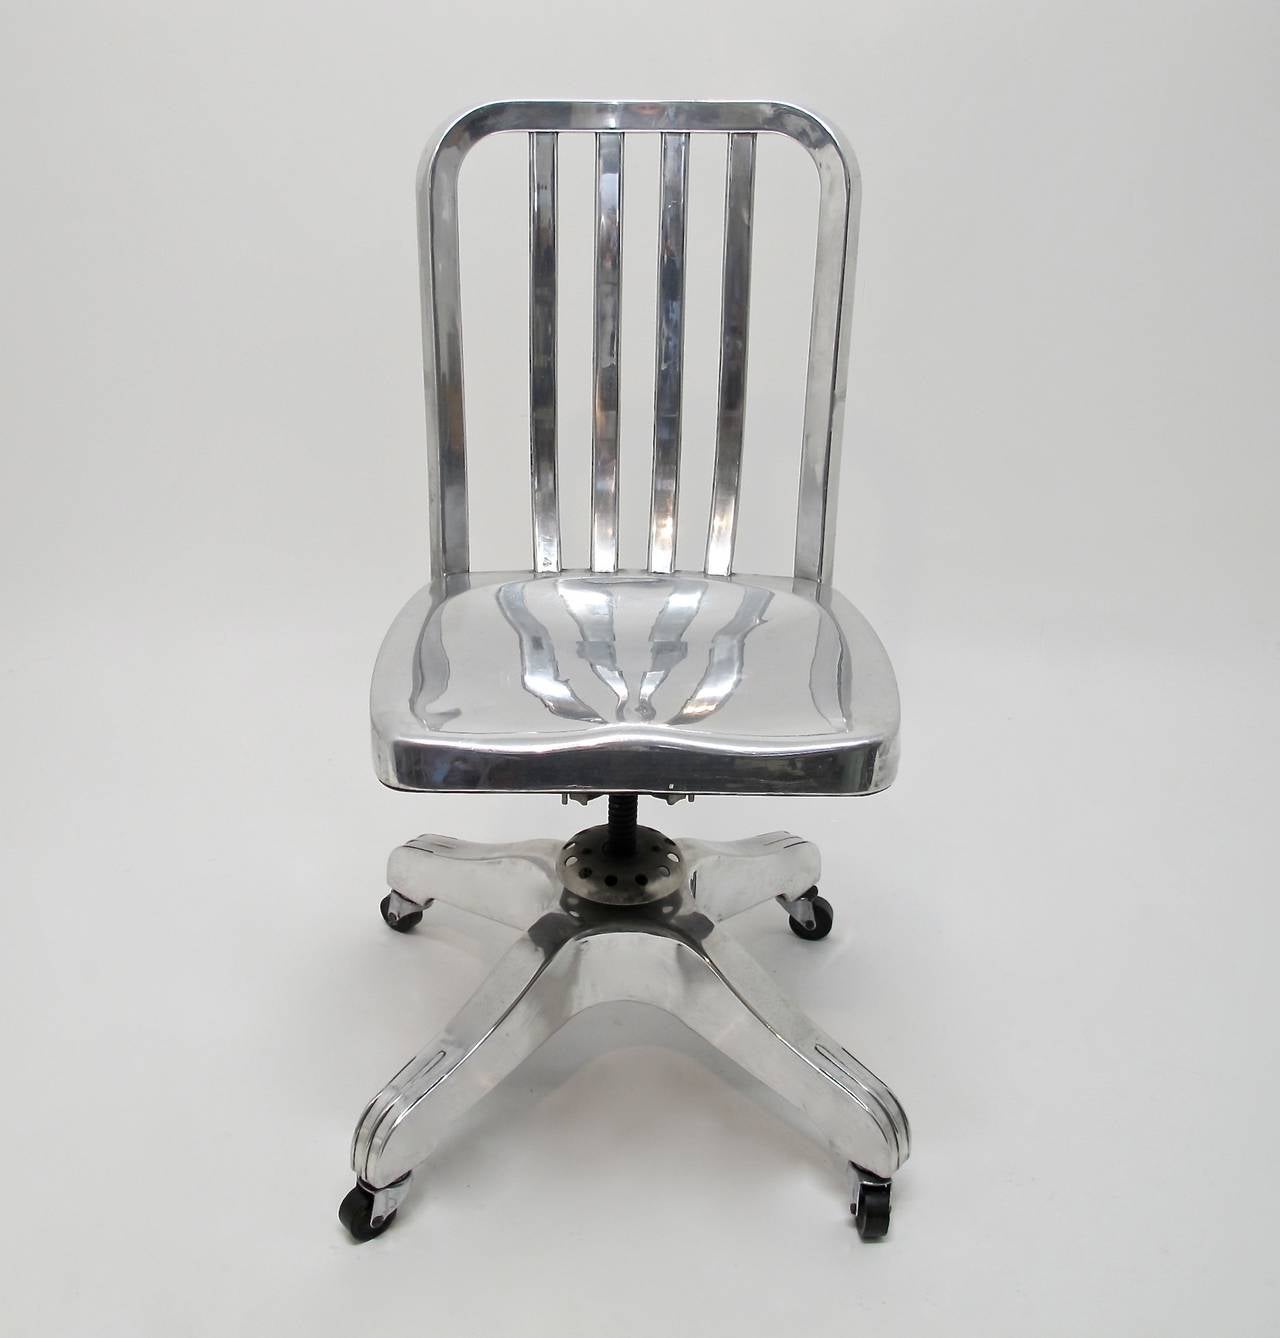 Polished aluminum desk or office chair by the General Fire Proofing Co. 